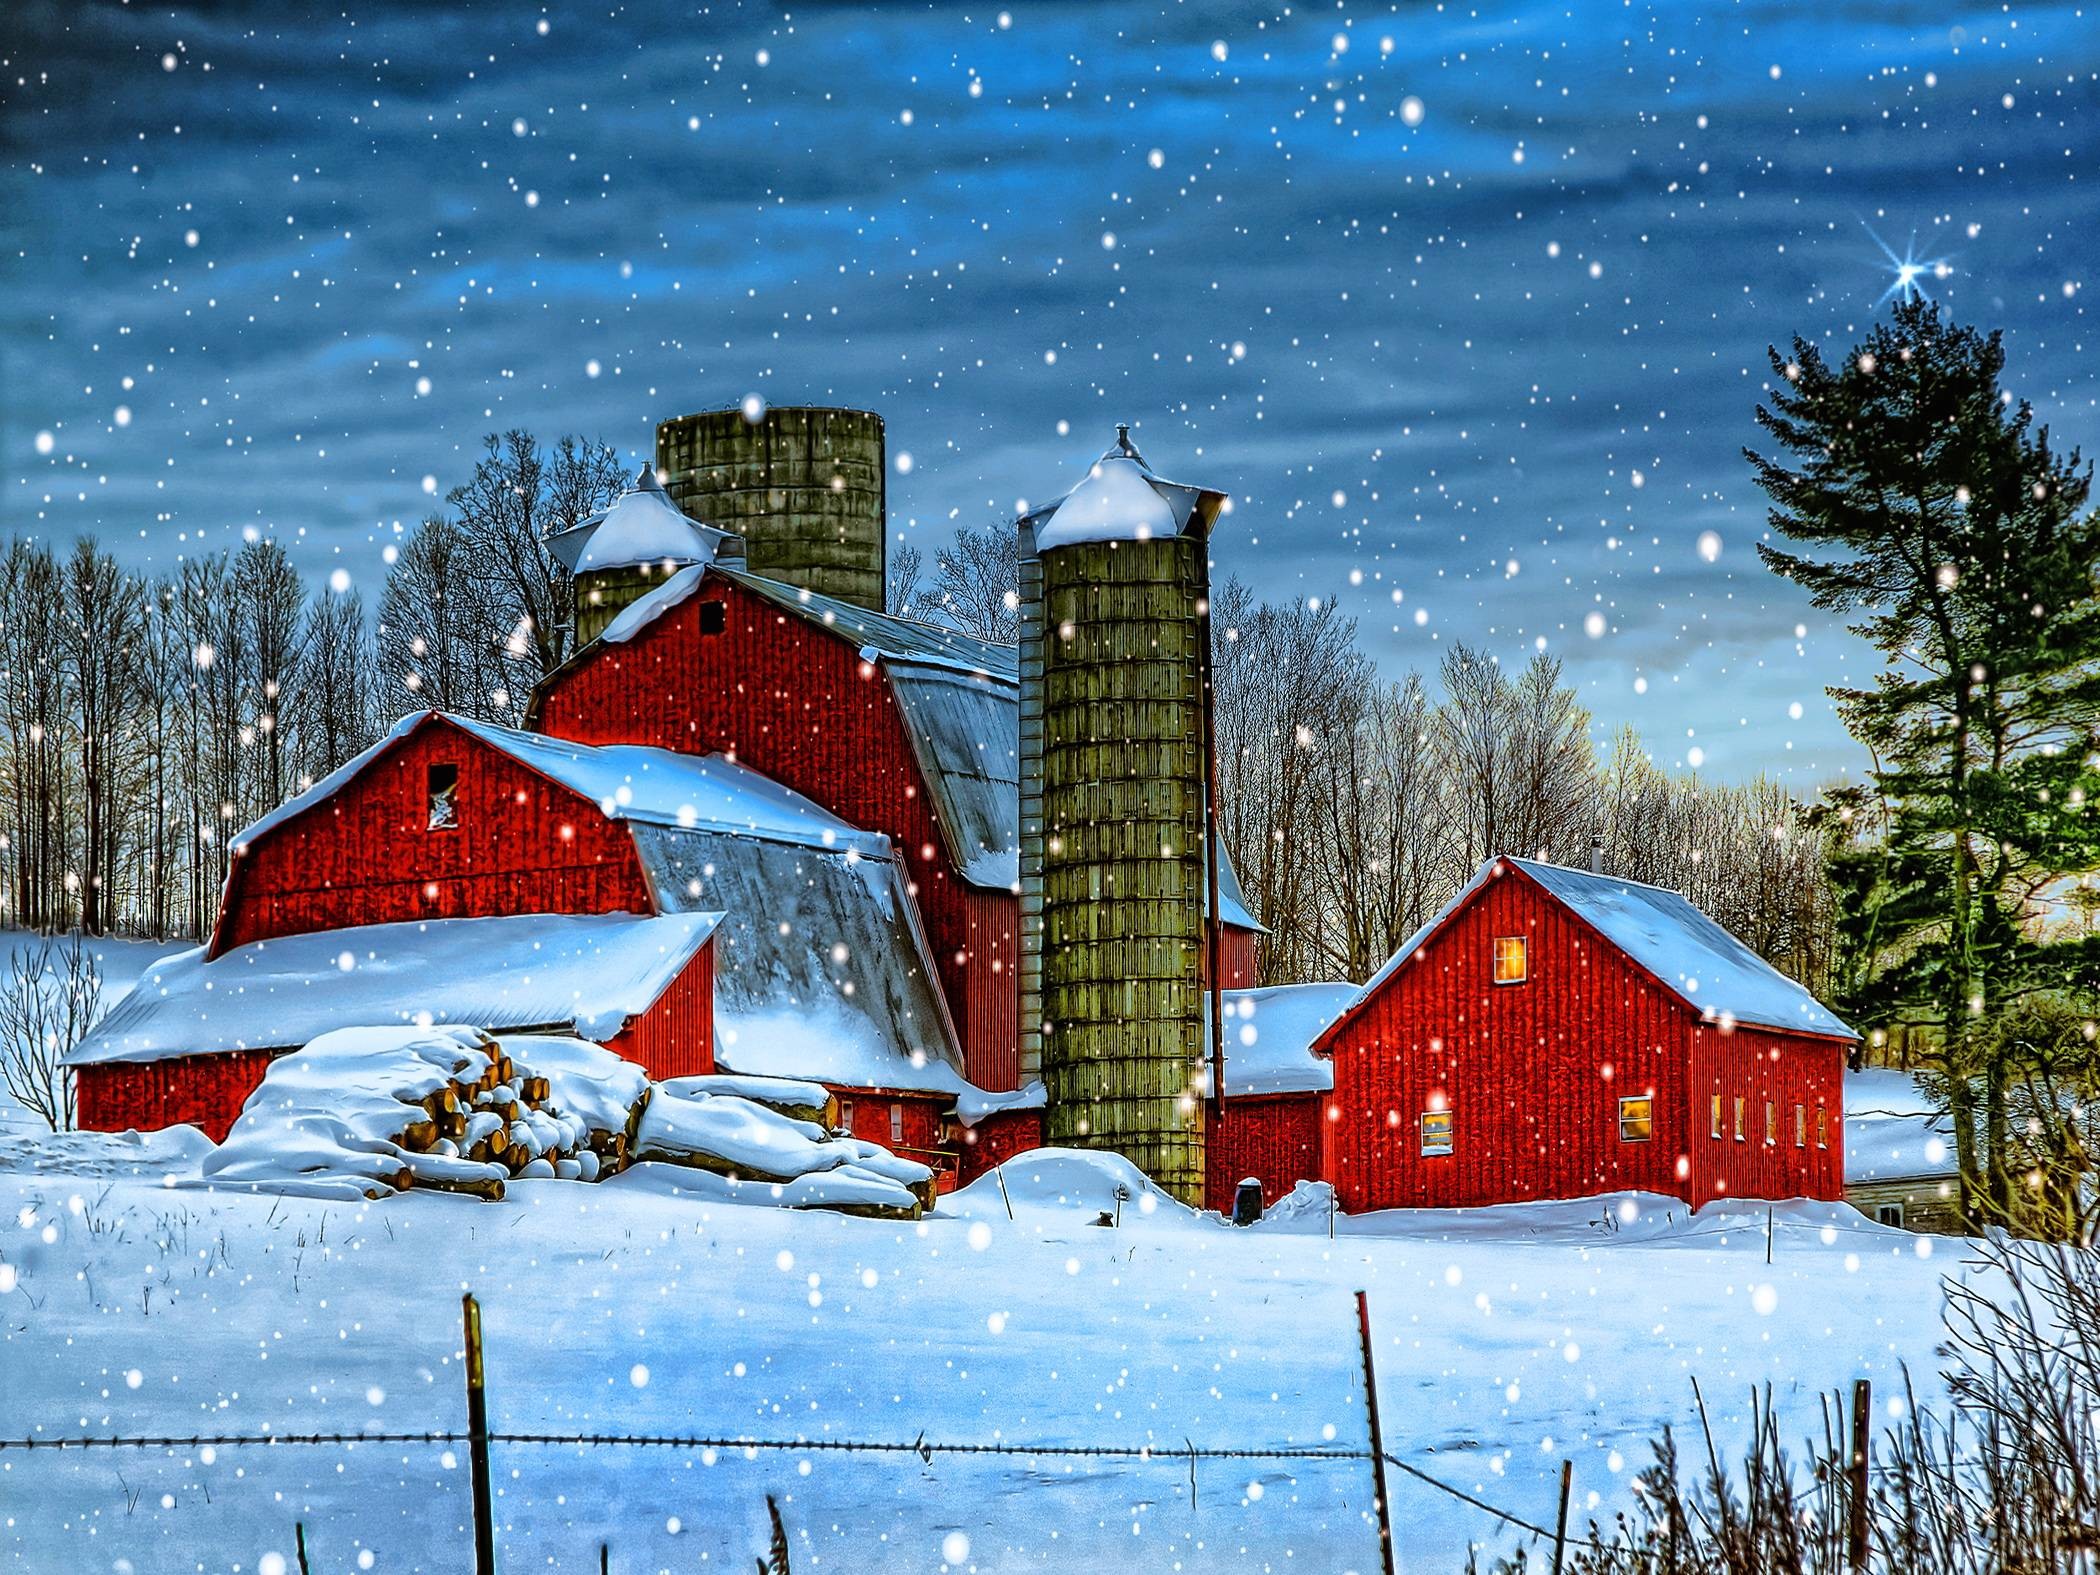 2100x1575 Cabins in the snow Wallpaper | High Quality Wallpaper